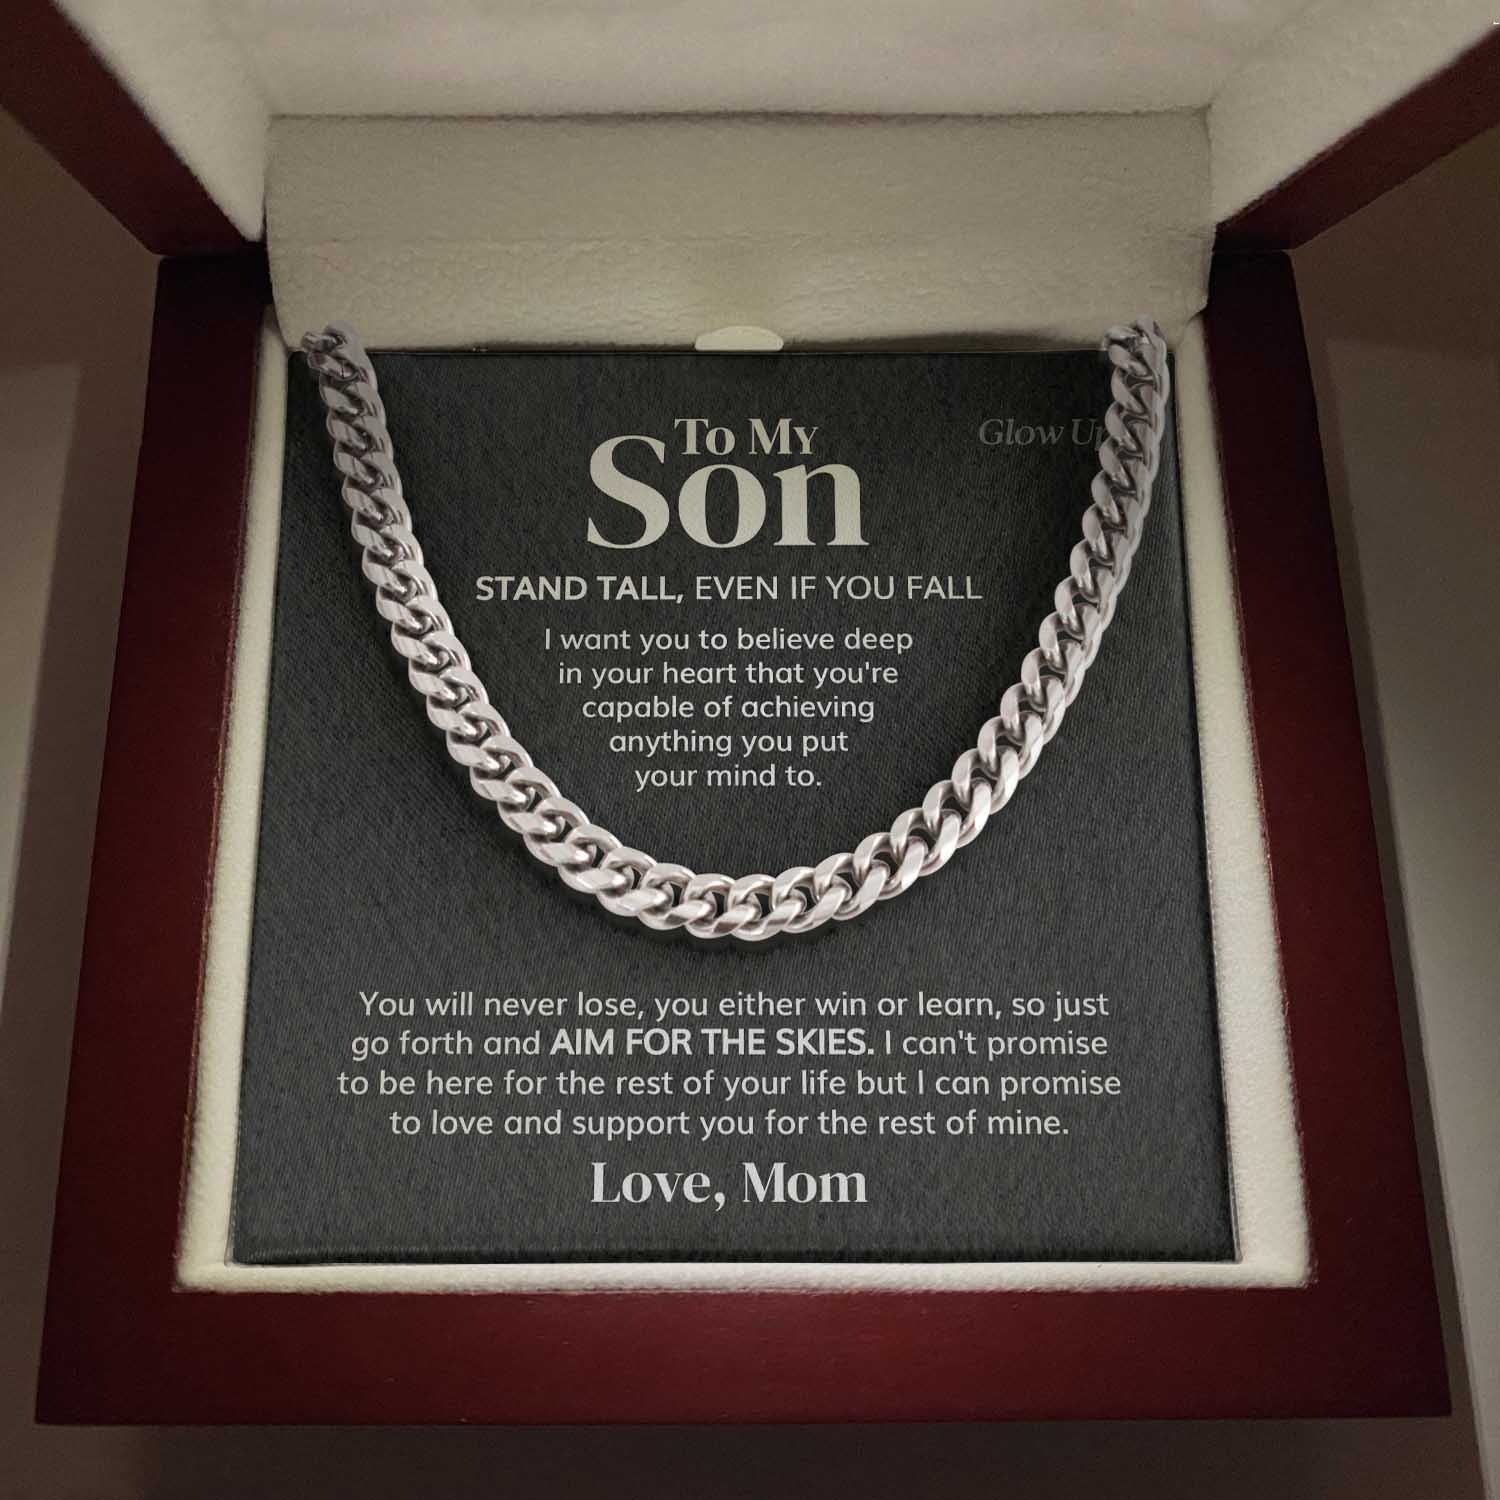 ShineOn Fulfillment Jewelry 316L Stainless Steel / Luxury LED Box To my Son - Aim for the skies - Cuban Link Chain Necklace